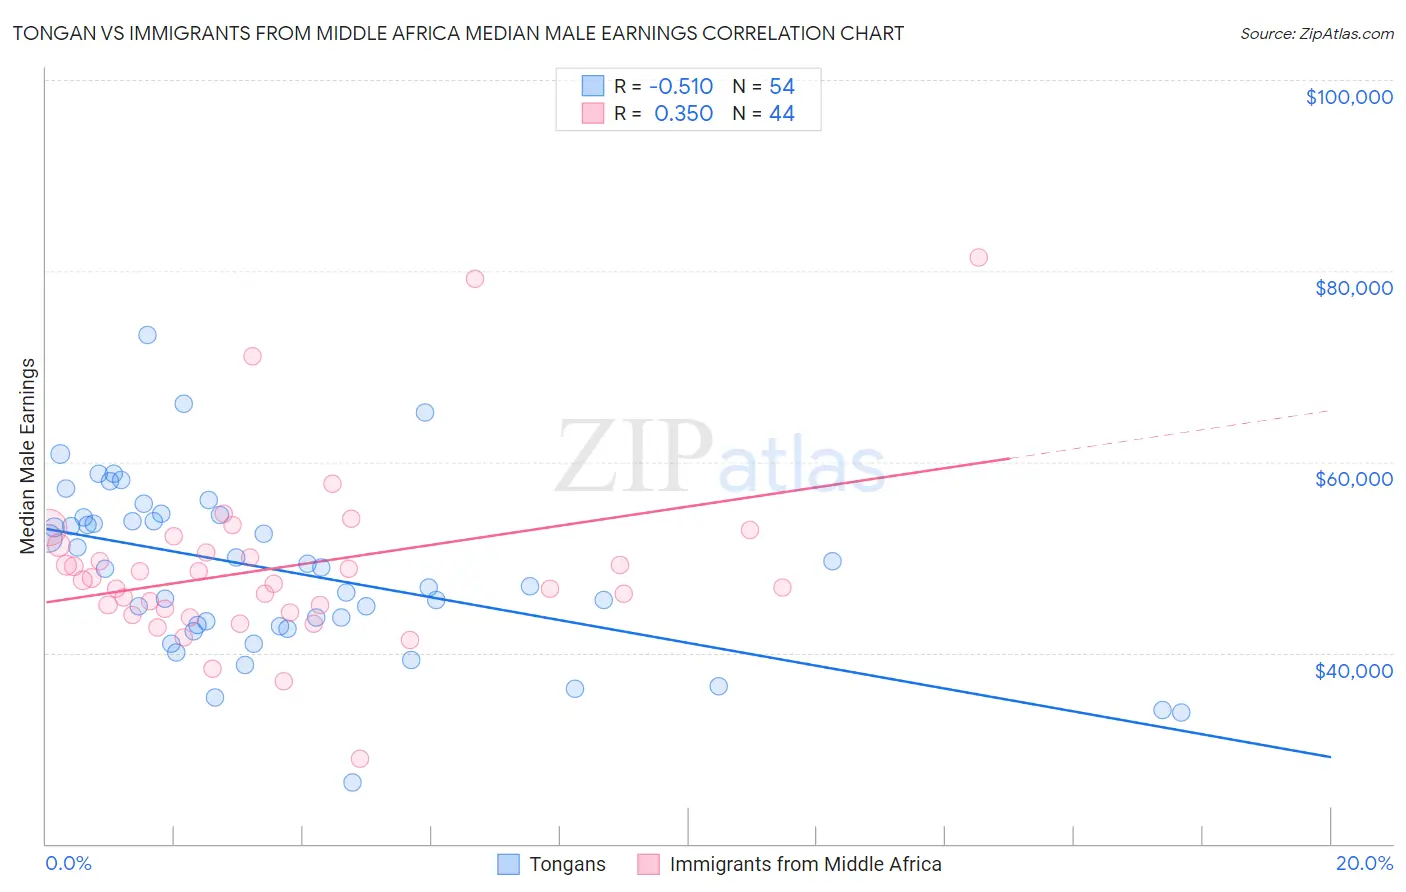 Tongan vs Immigrants from Middle Africa Median Male Earnings